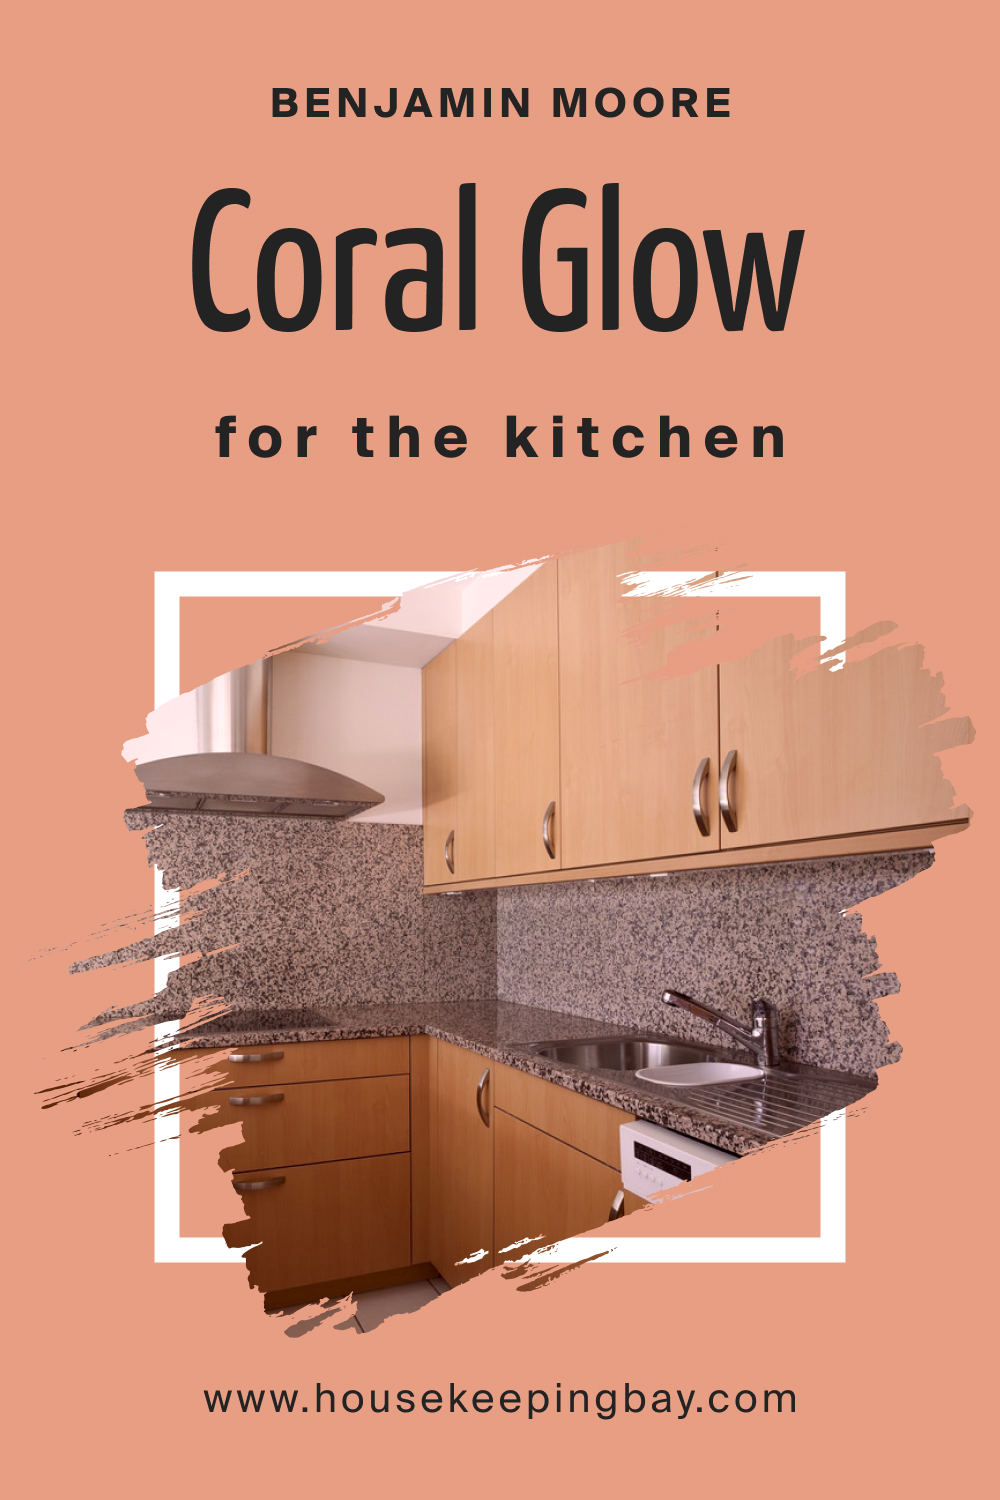 Benjamin Moore. Coral Glow 026 for the Kitchen